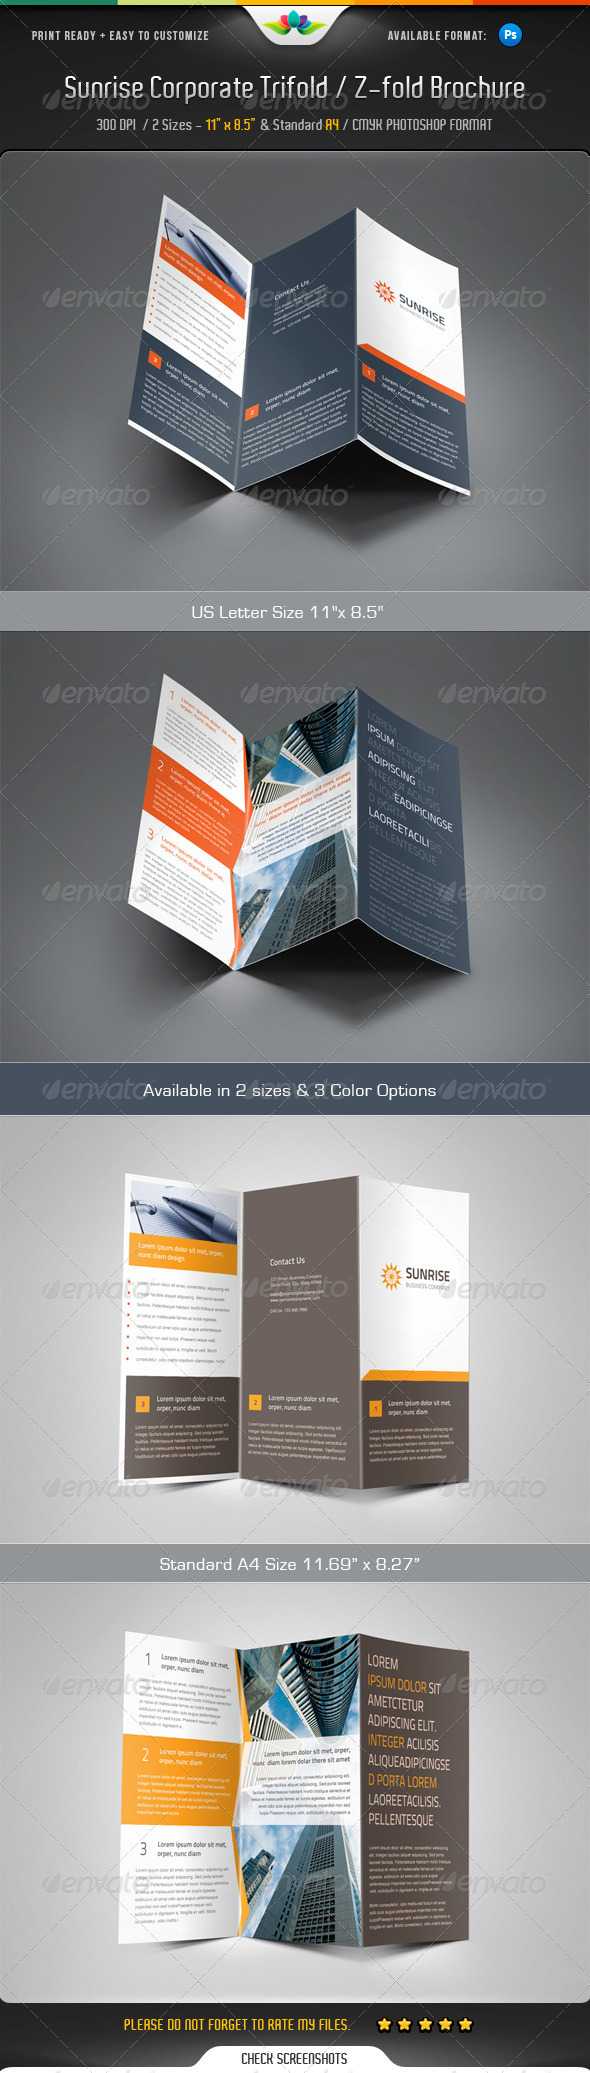 Z Fold Brochure Templates From Graphicriver Within Z Fold Brochure Template Indesign